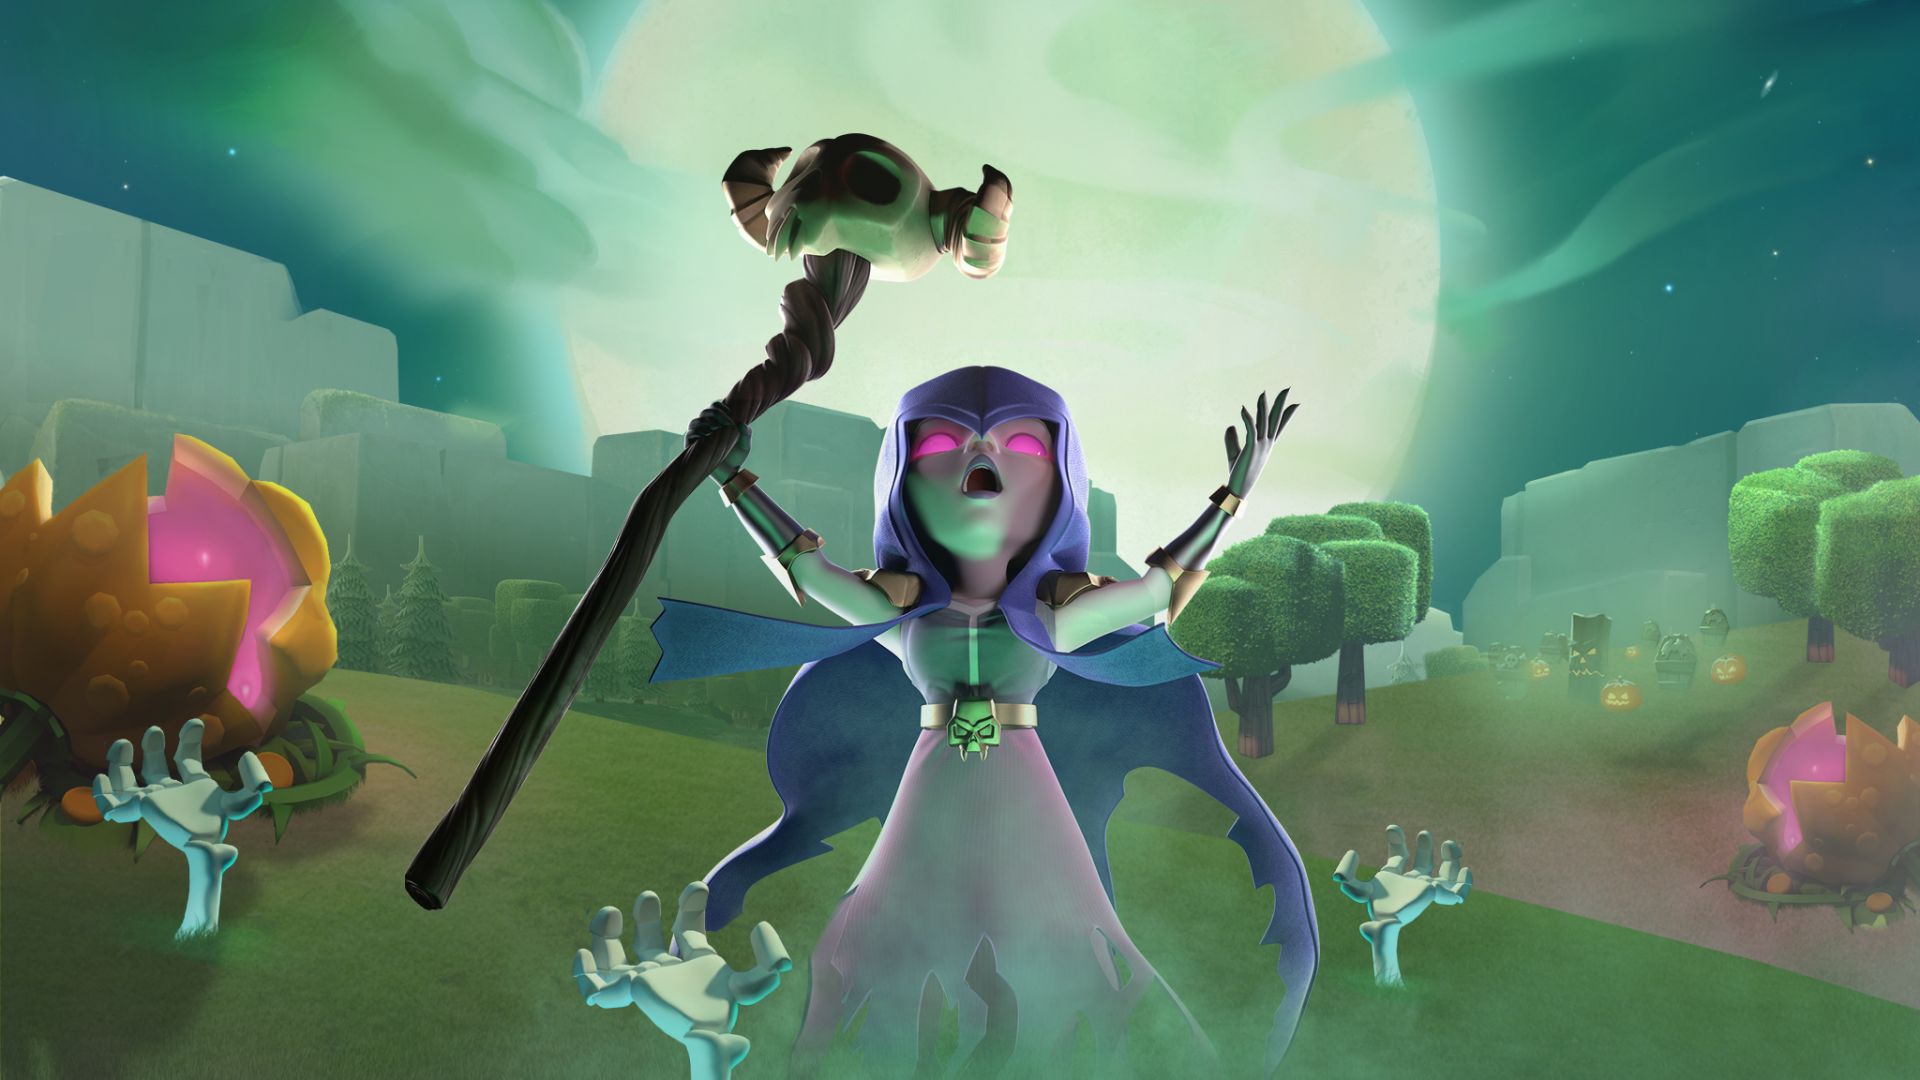 Desktop Wallpaper Witch Of Clash Of Clans Mobile Game, Hd Image, Picture,  Background, Rxku B